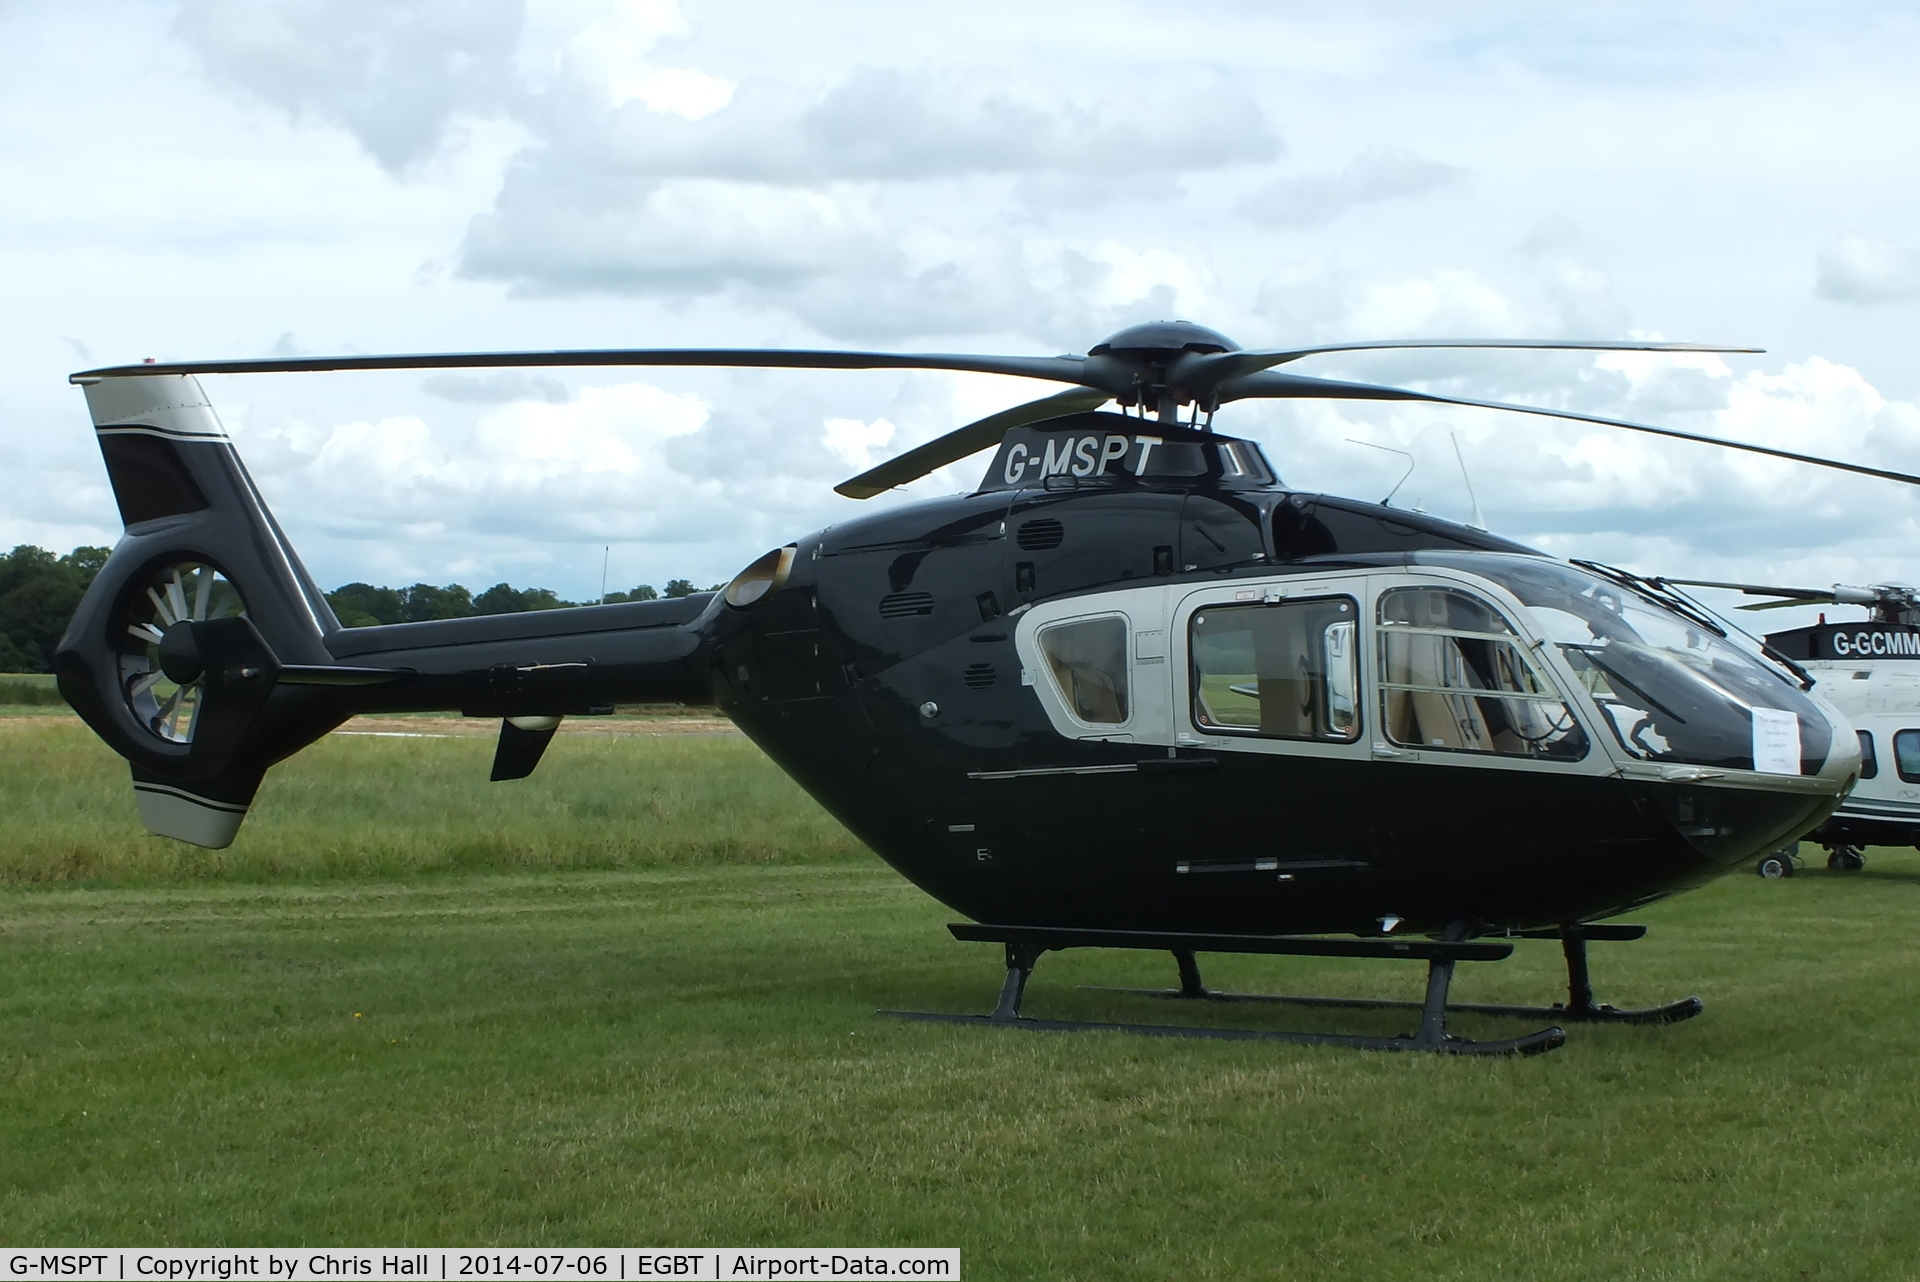 G-MSPT, 2004 Eurocopter EC-135T-2 C/N 0361, ferrying race fans to the British F1 Grand Prix at Silverstone